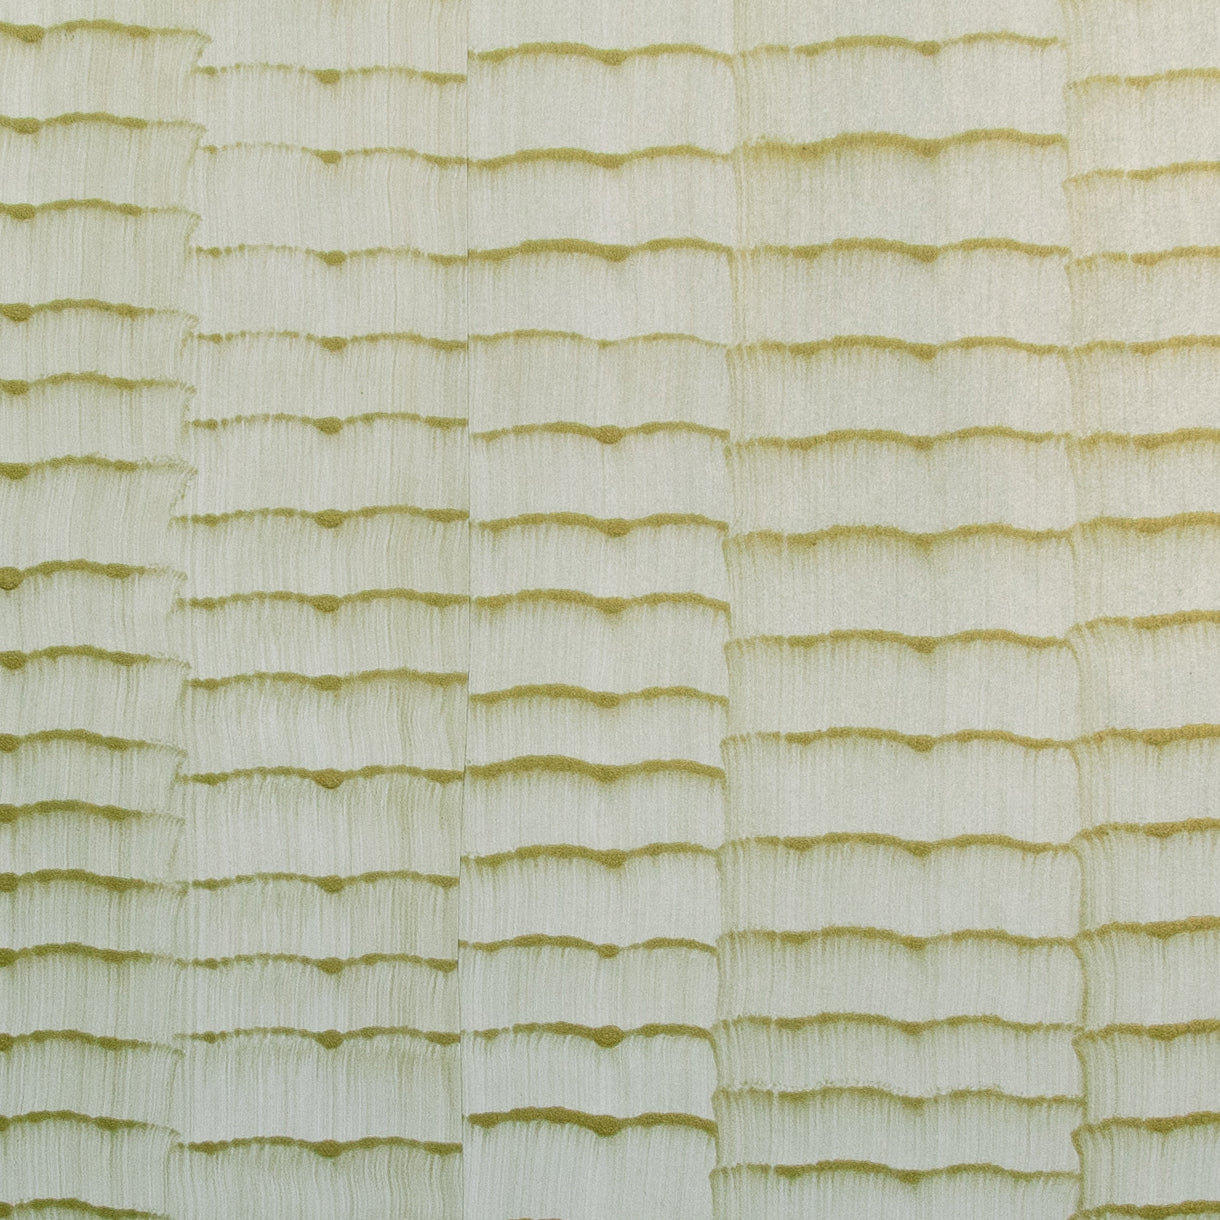 Detail of wallpaper in an abstract textural pattern in metallic green and greige.